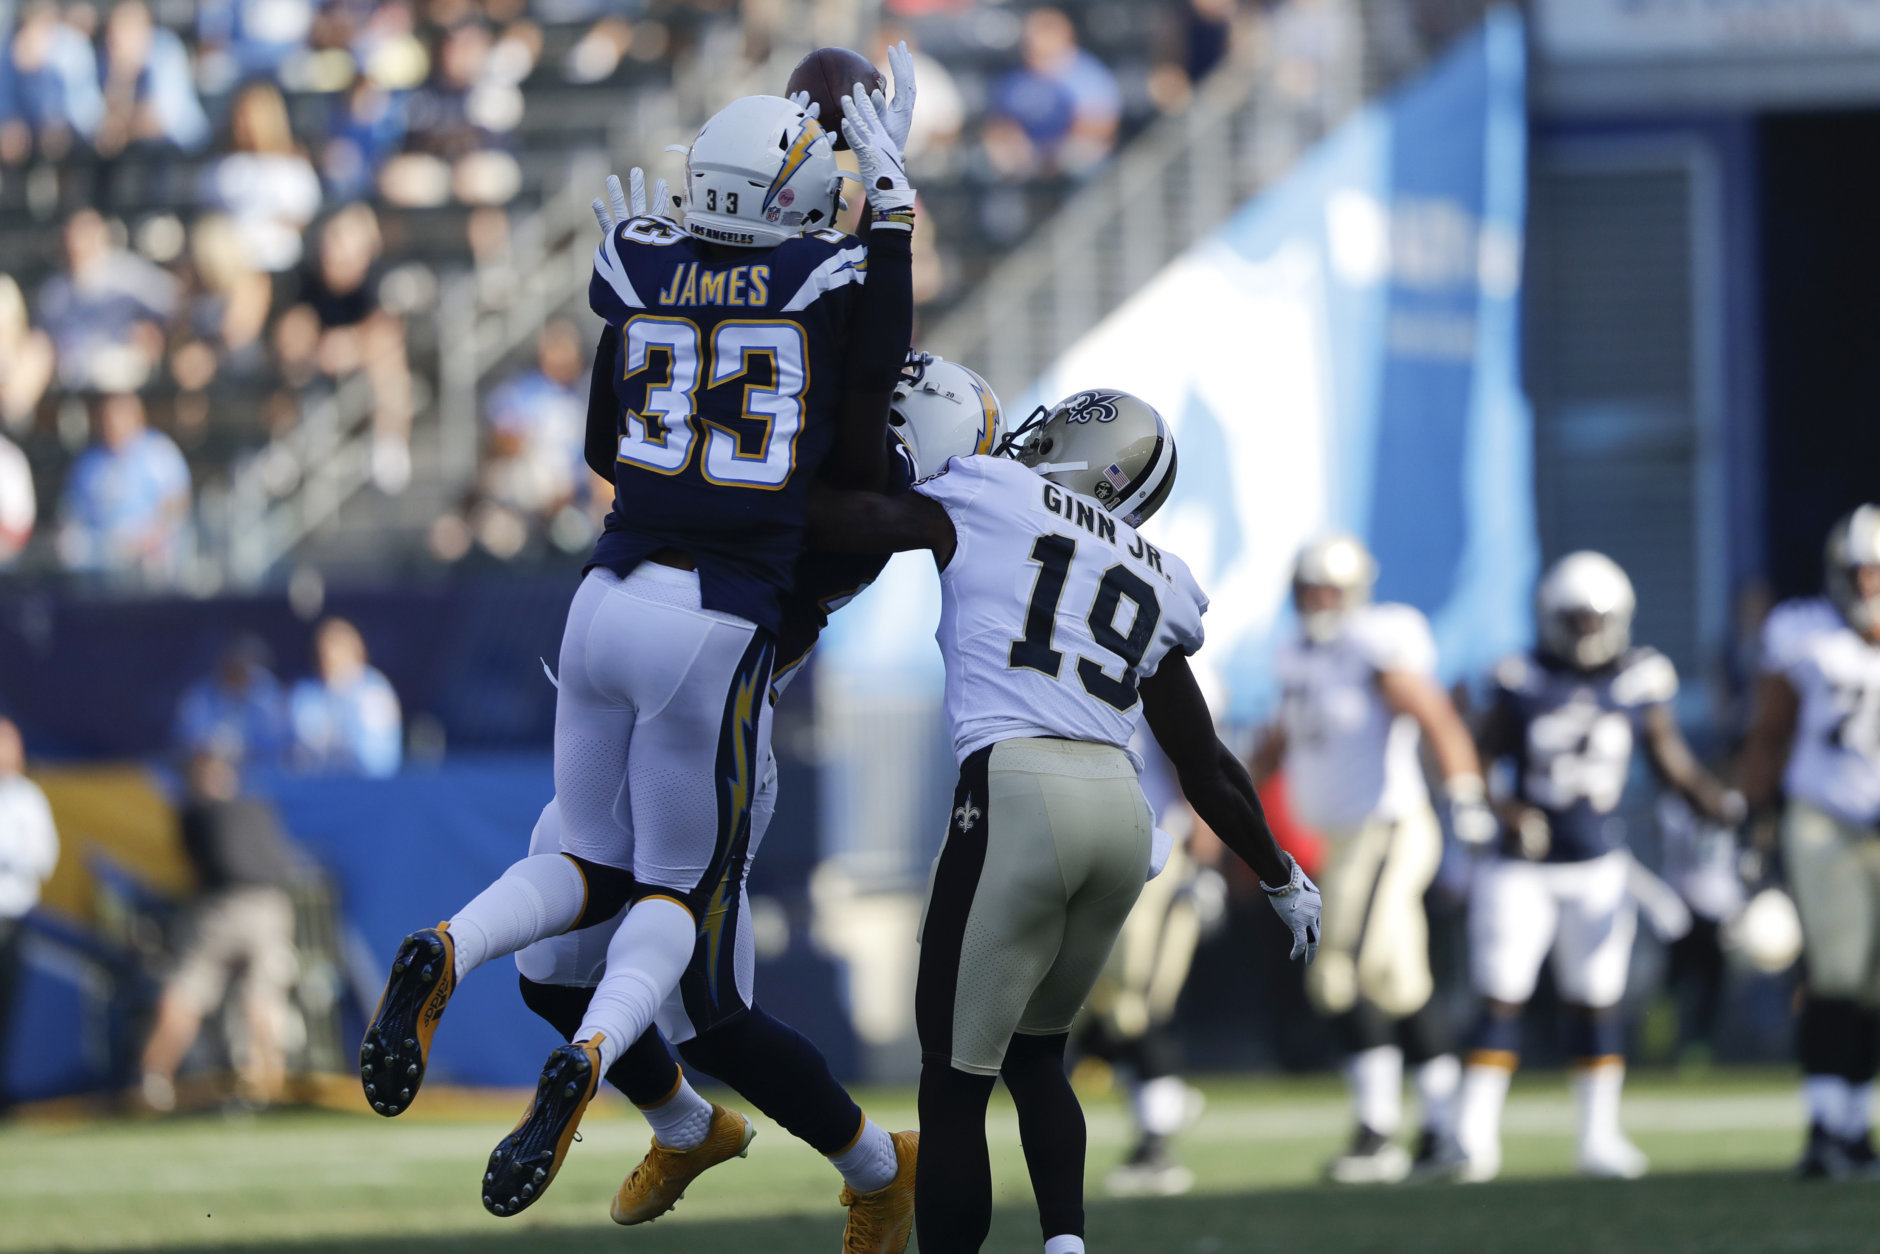 Los Angeles Chargers defensive back Derwin James (33) intercepts a pass over New Orleans Saints wide receiver Ted Ginn (19) during the first half of an NFL preseason football game Saturday, Aug. 25, 2018, in Carson, Calif. (AP Photo/Marcio Jose Sanchez)